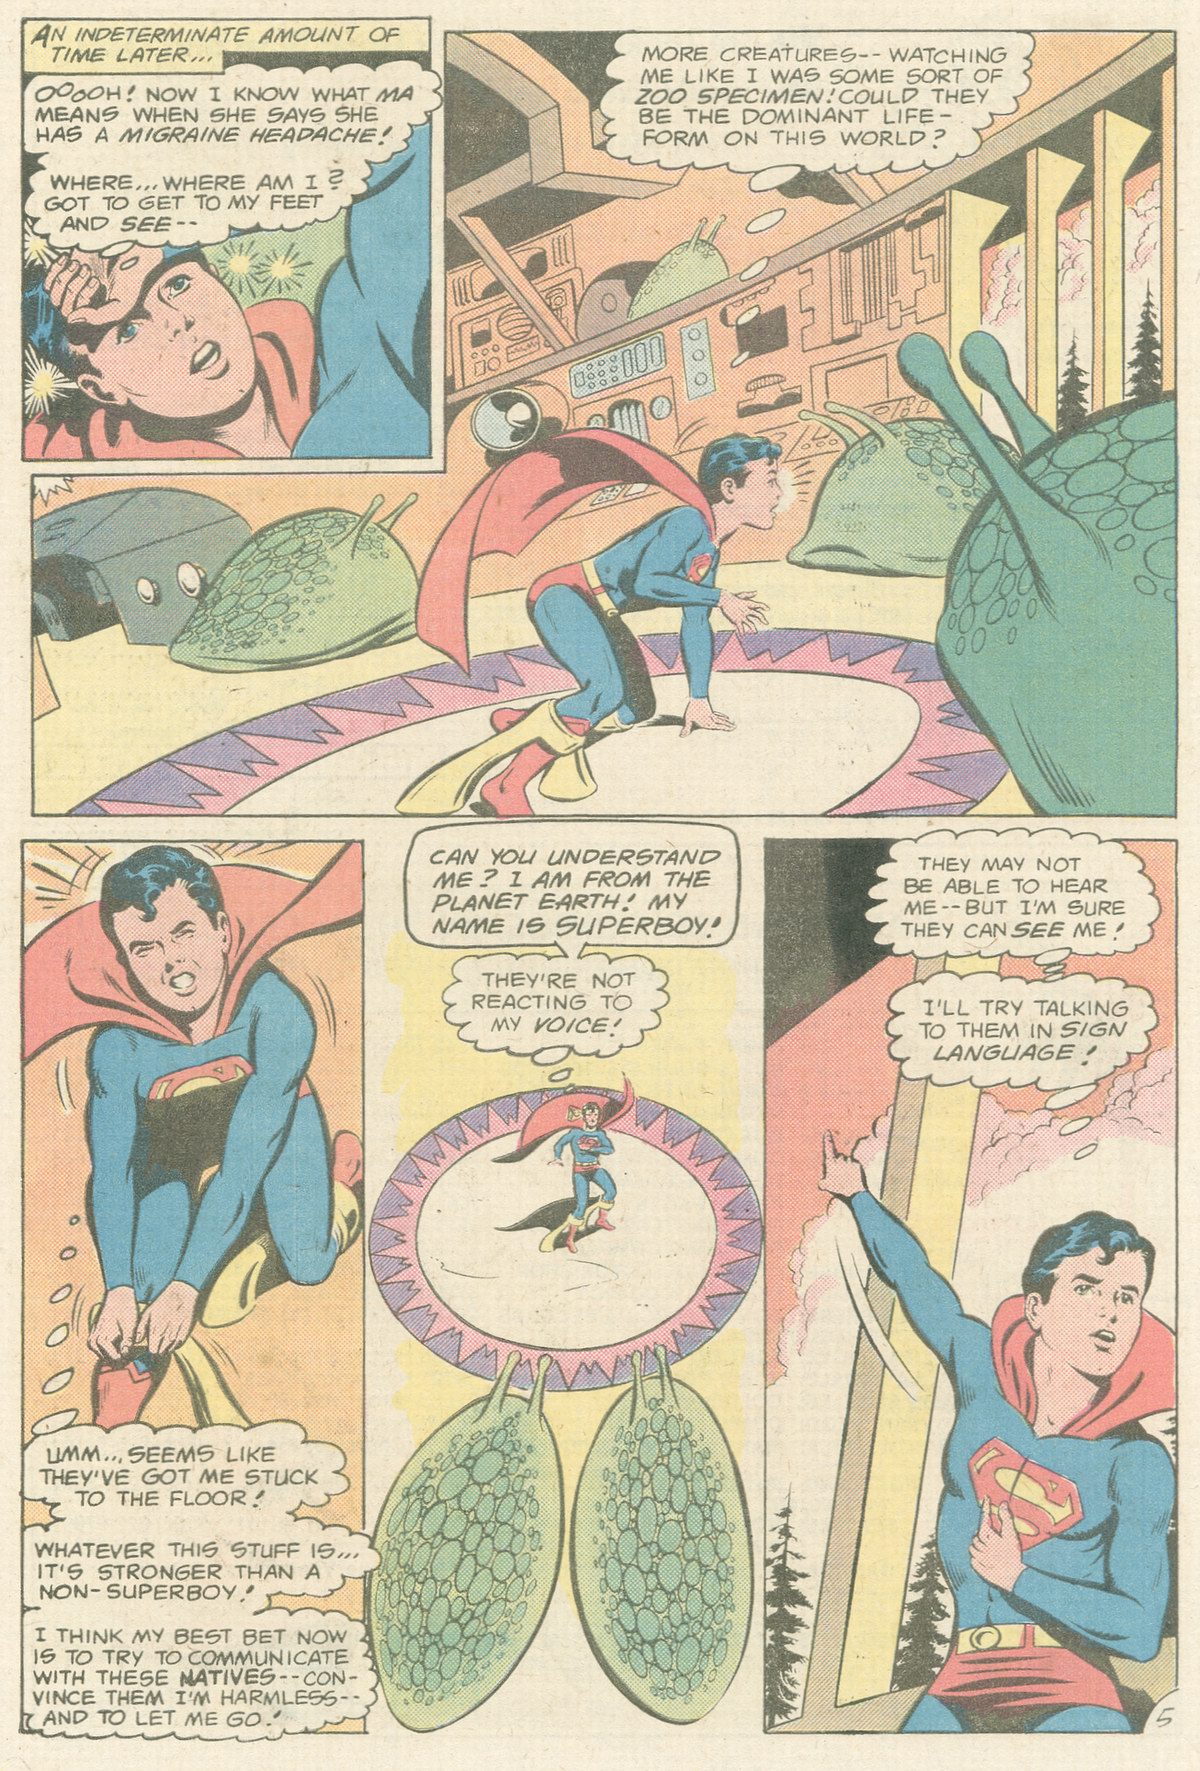 The New Adventures of Superboy 20 Page 22